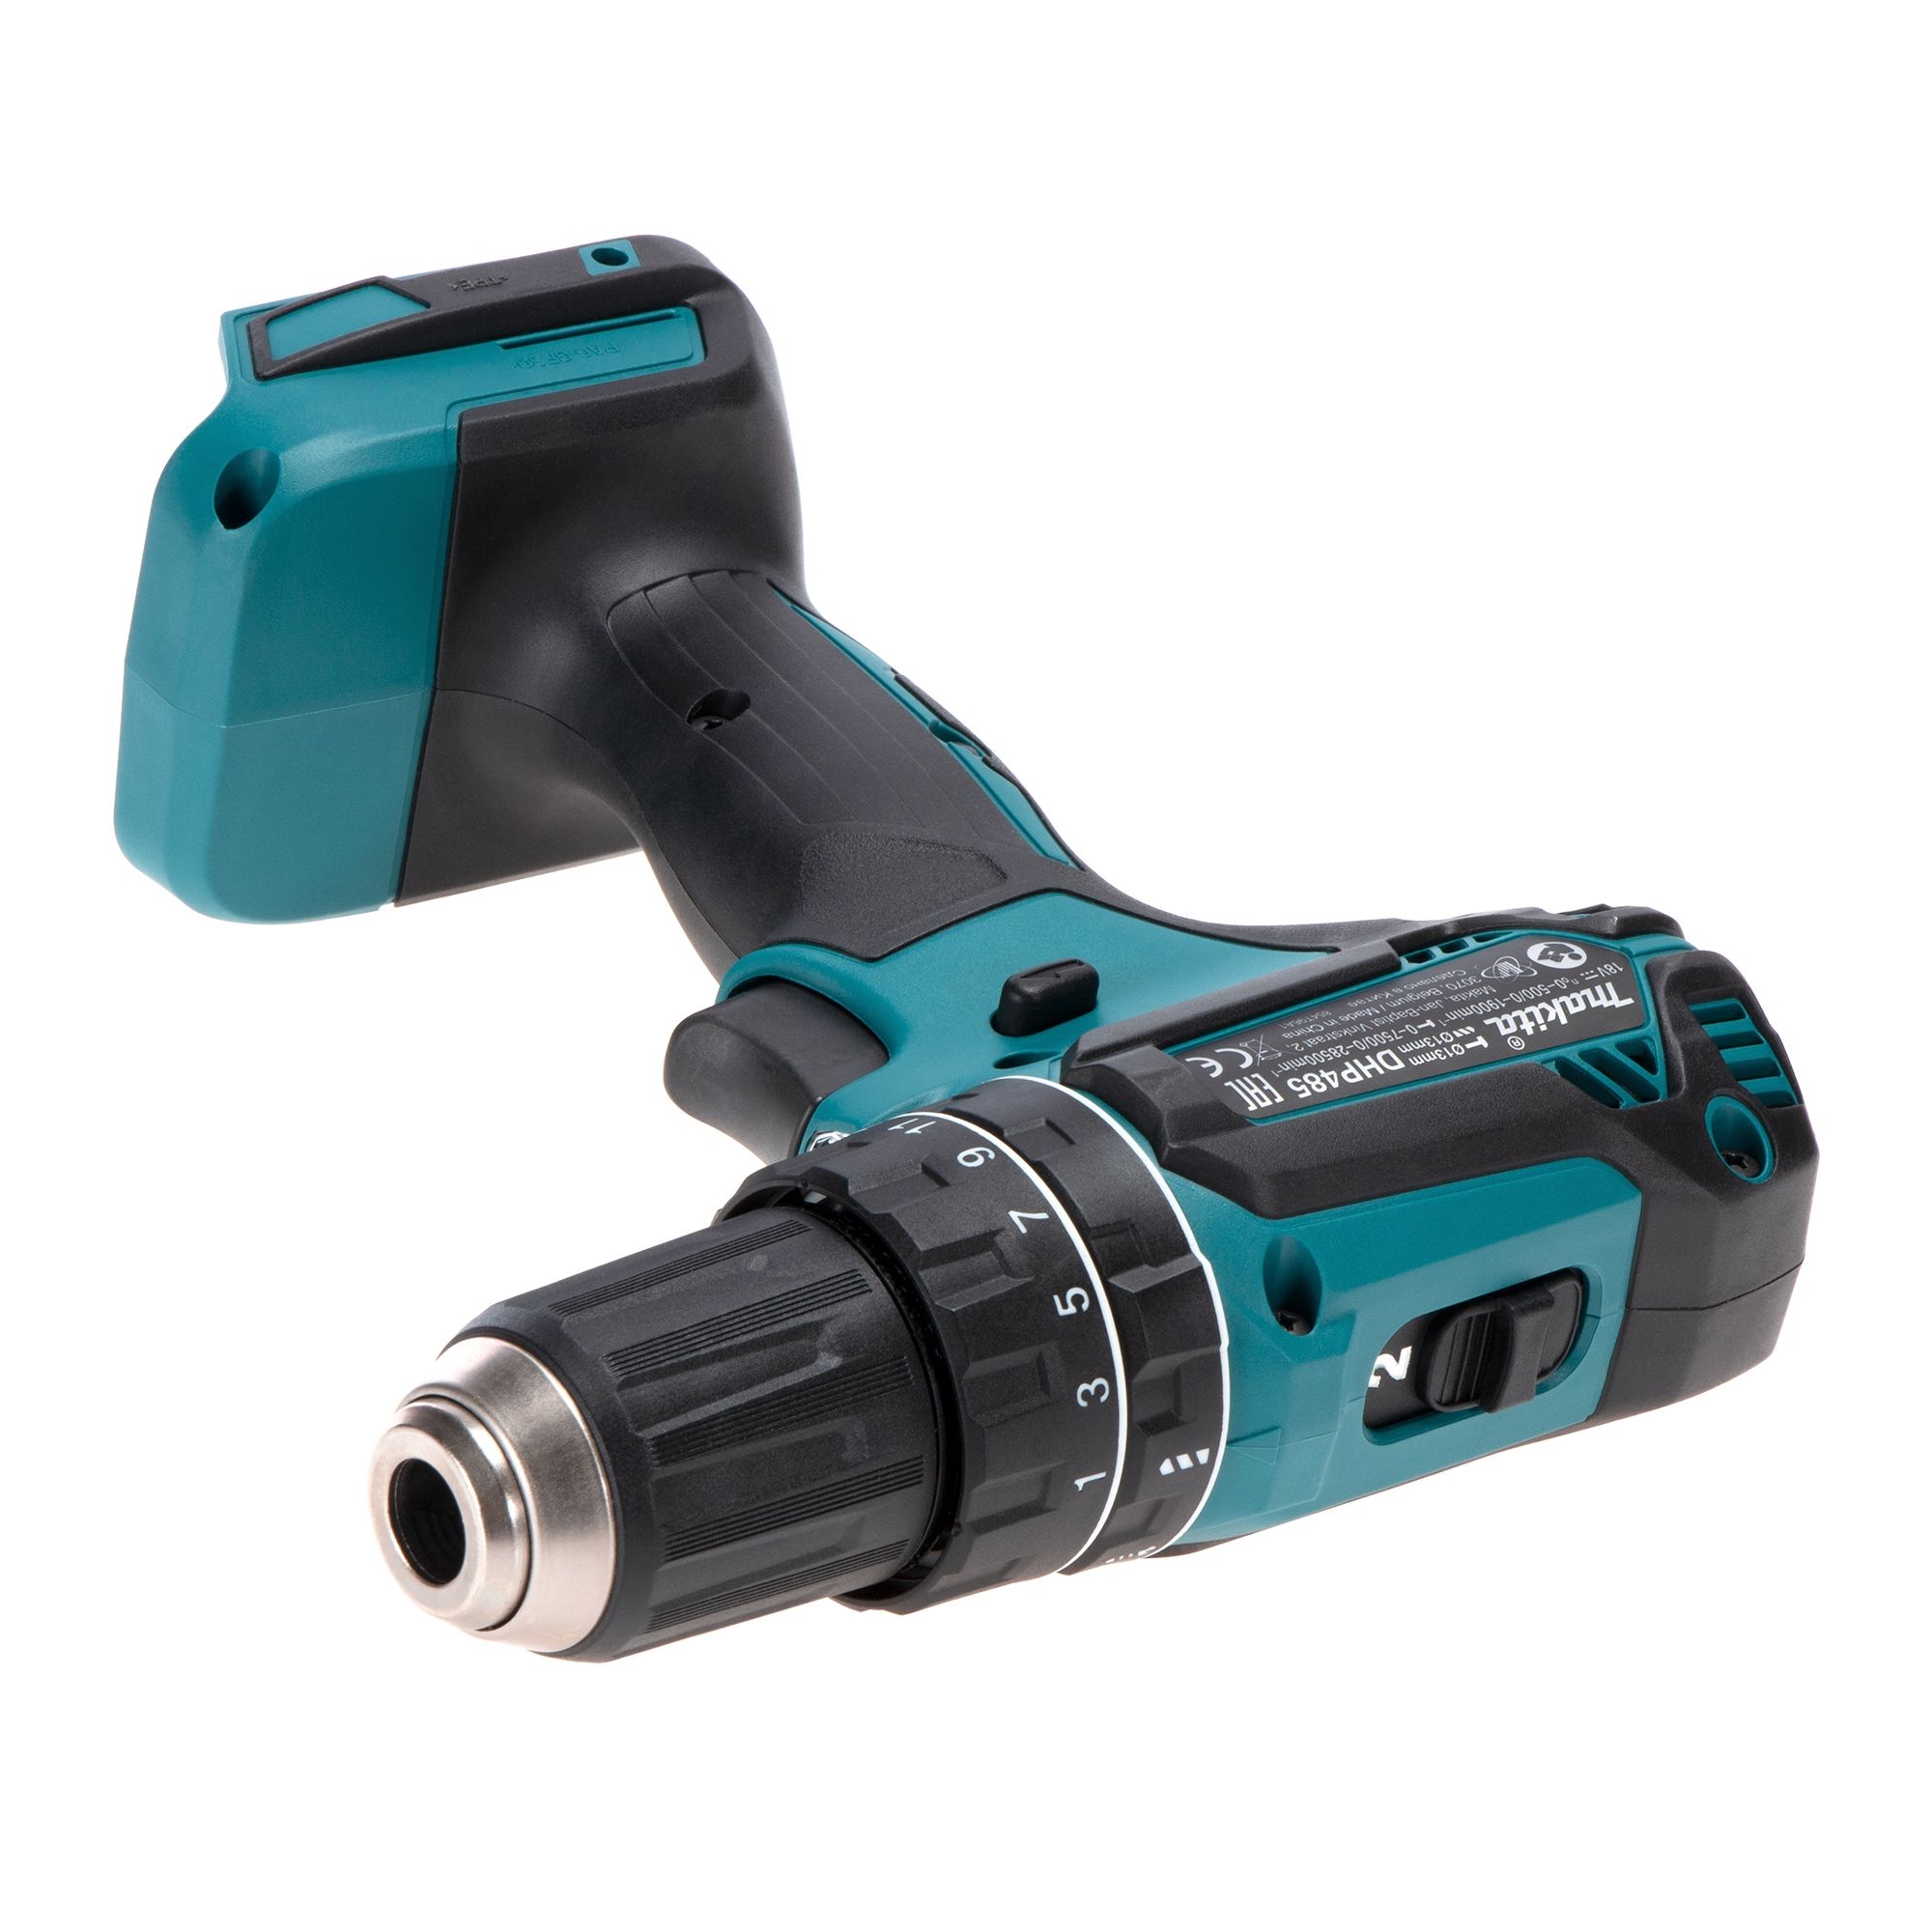 Makita DHP485Z 18v LXT Cordless Brushless 2-Speed Combi Drill Body Only 